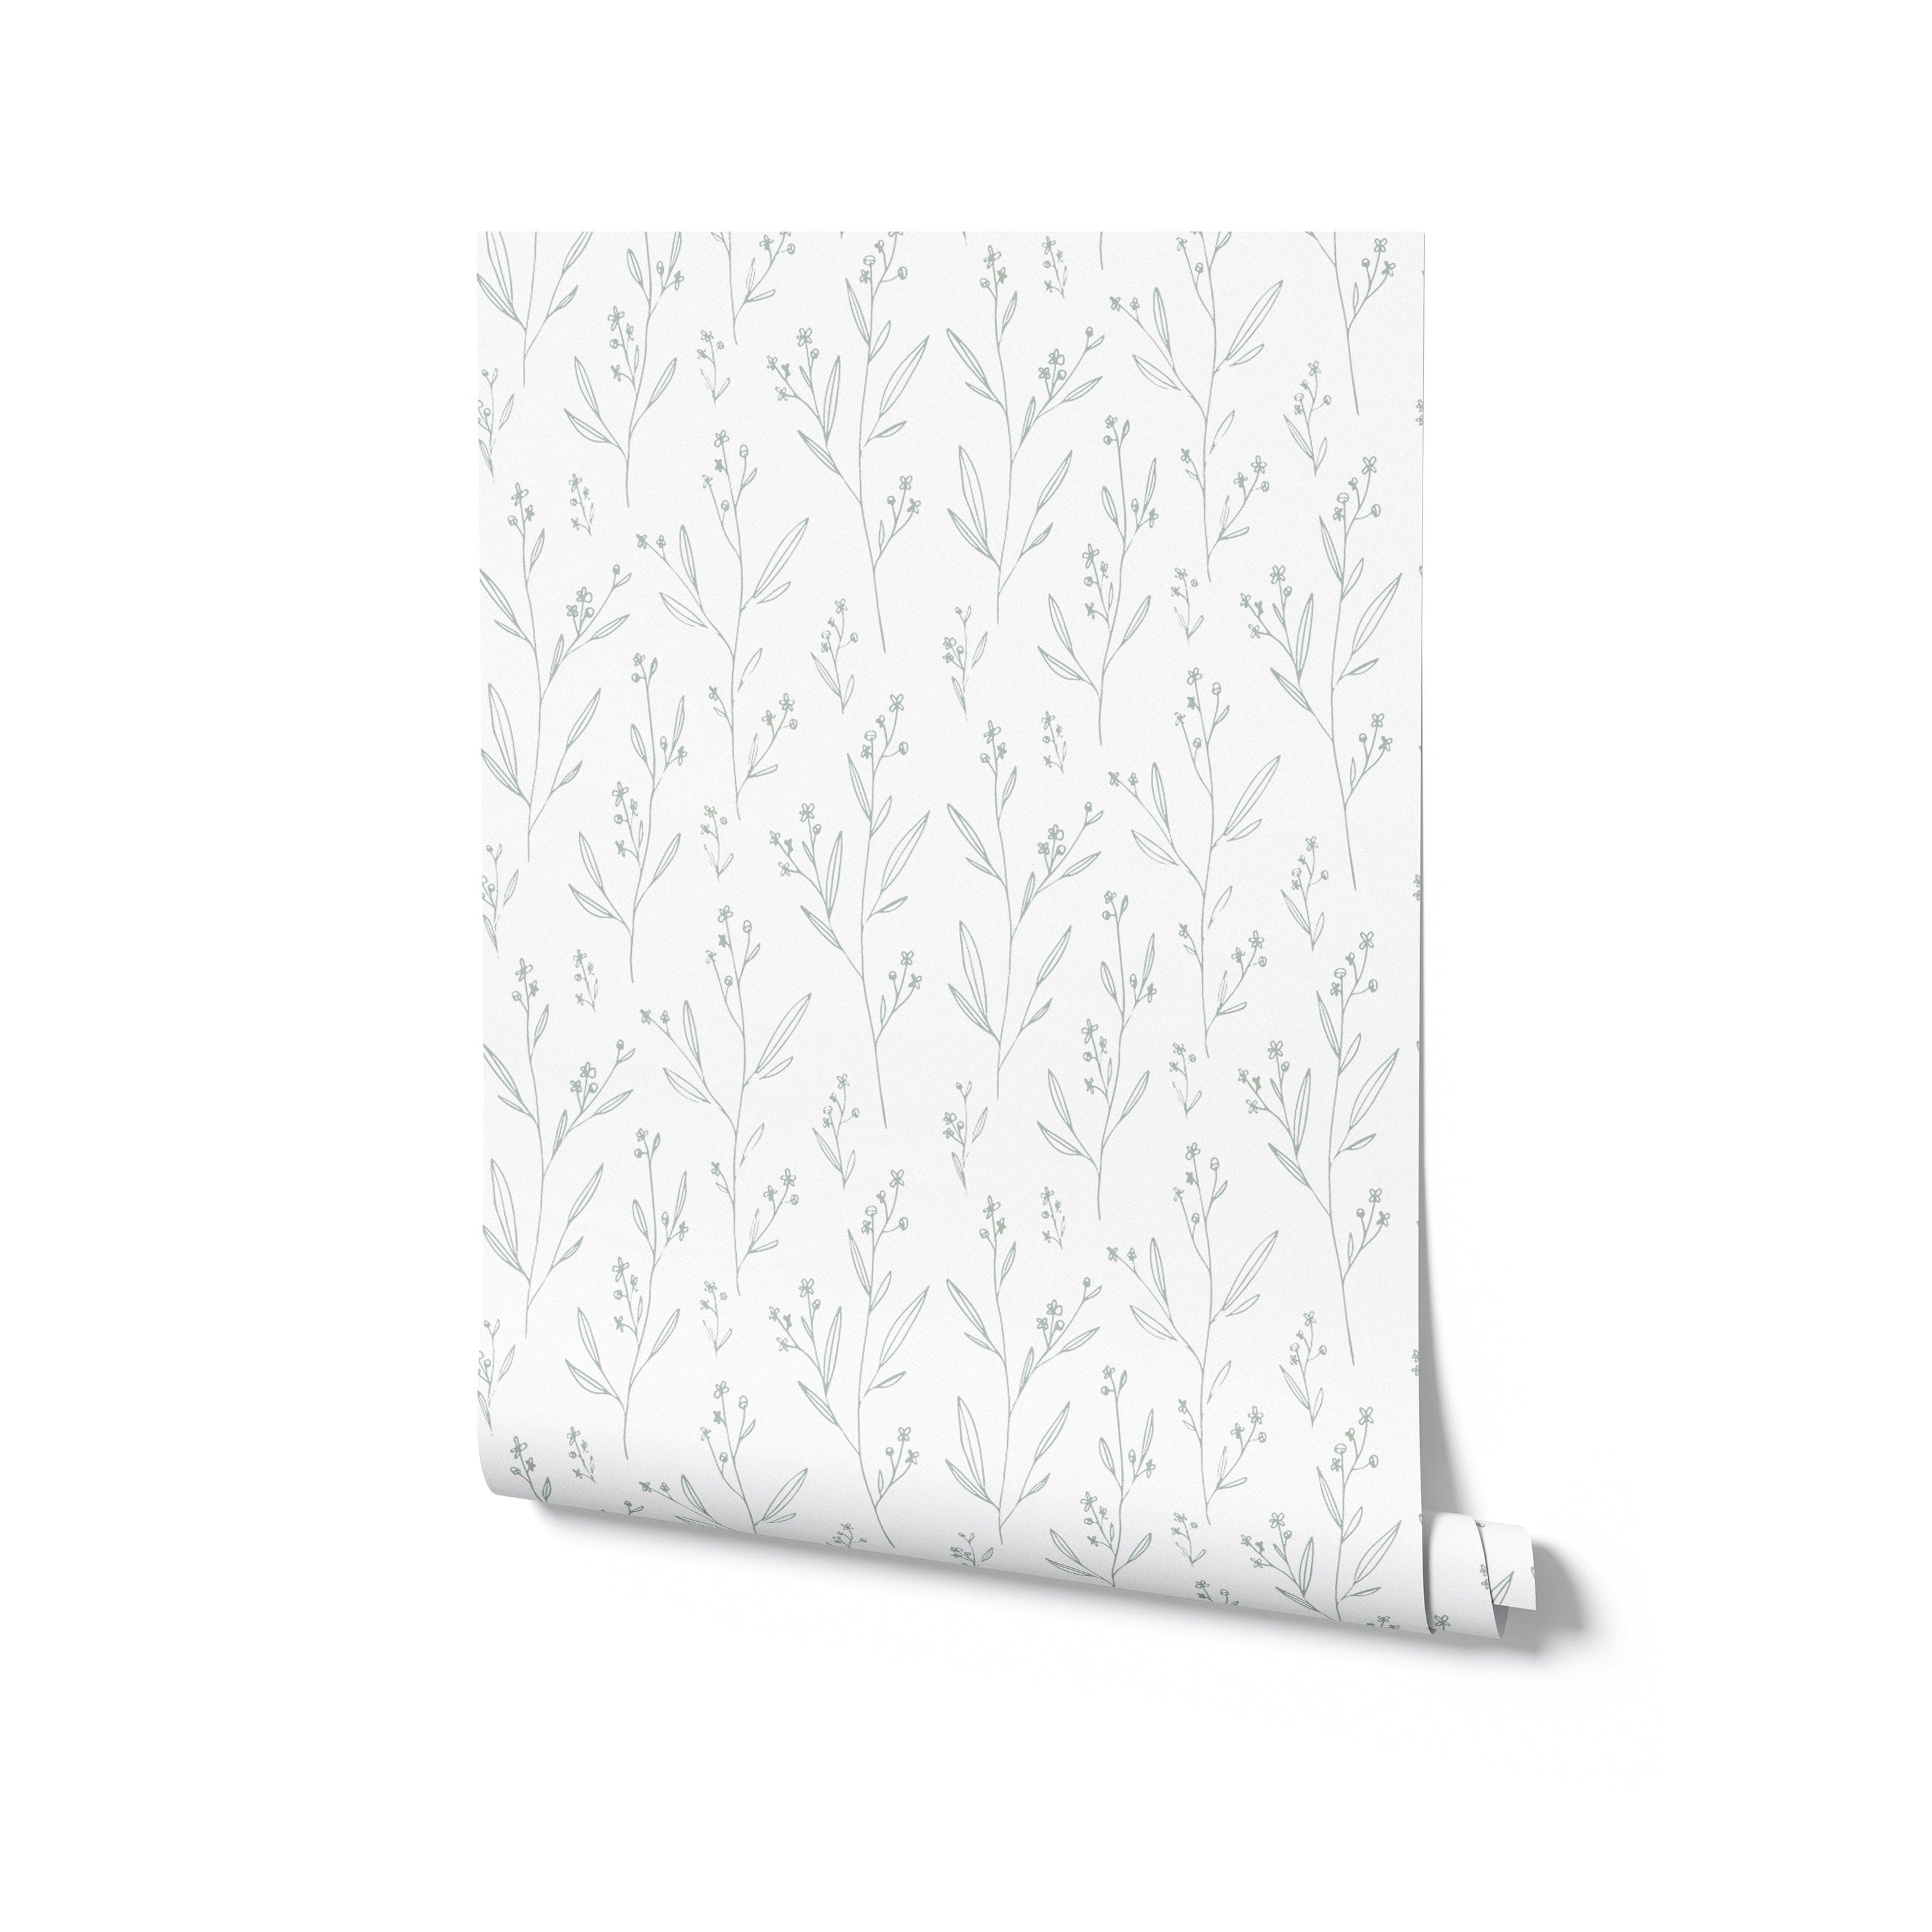 A rolled sample of the Dainty Minimal Floral - Light Sage wallpaper, highlighting the light and airy botanical design. The wallpaper presents a series of slender branches with delicate leaves and flowers, all rendered in a light sage green that suggests a fresh, spring-like ambiance. This image indicates the wallpaper’s potential to bring a touch of nature’s tranquility into a home.